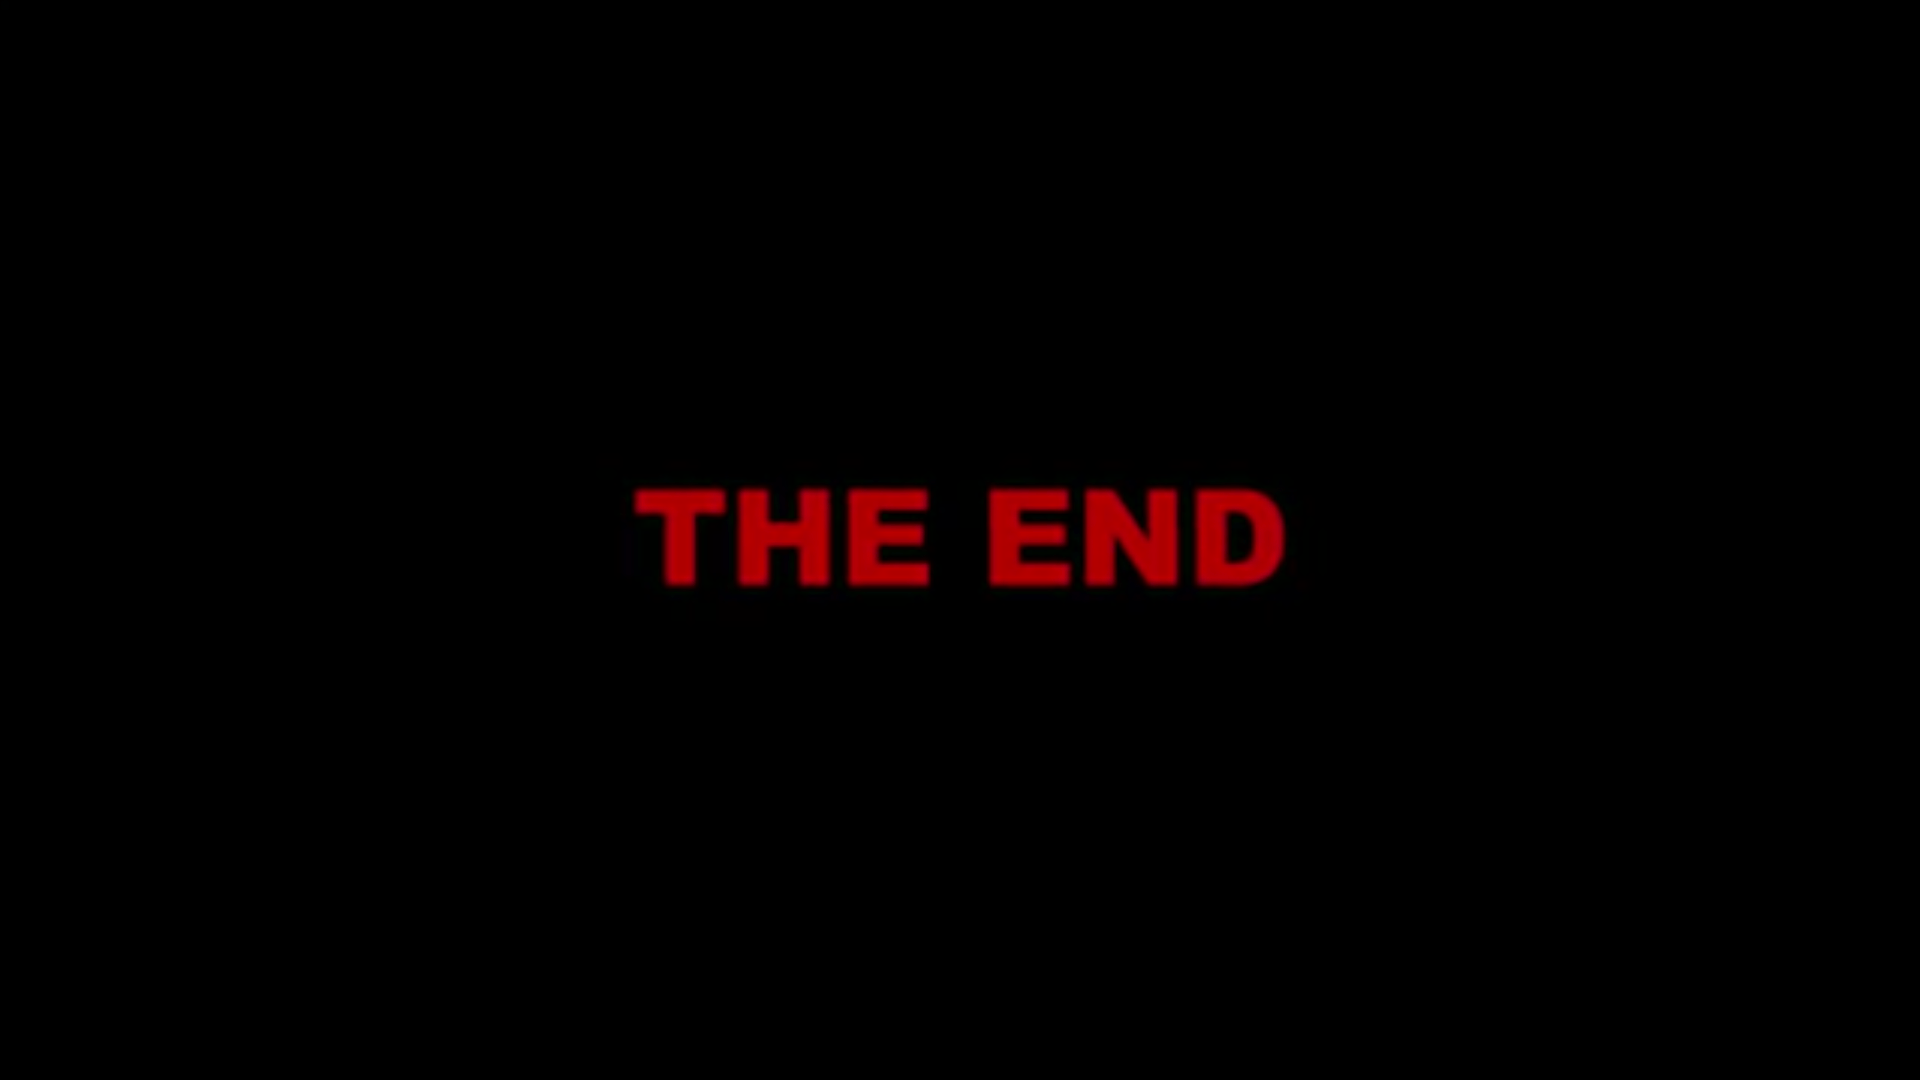 The End Full HD Wallpaper and Background Imagex1080